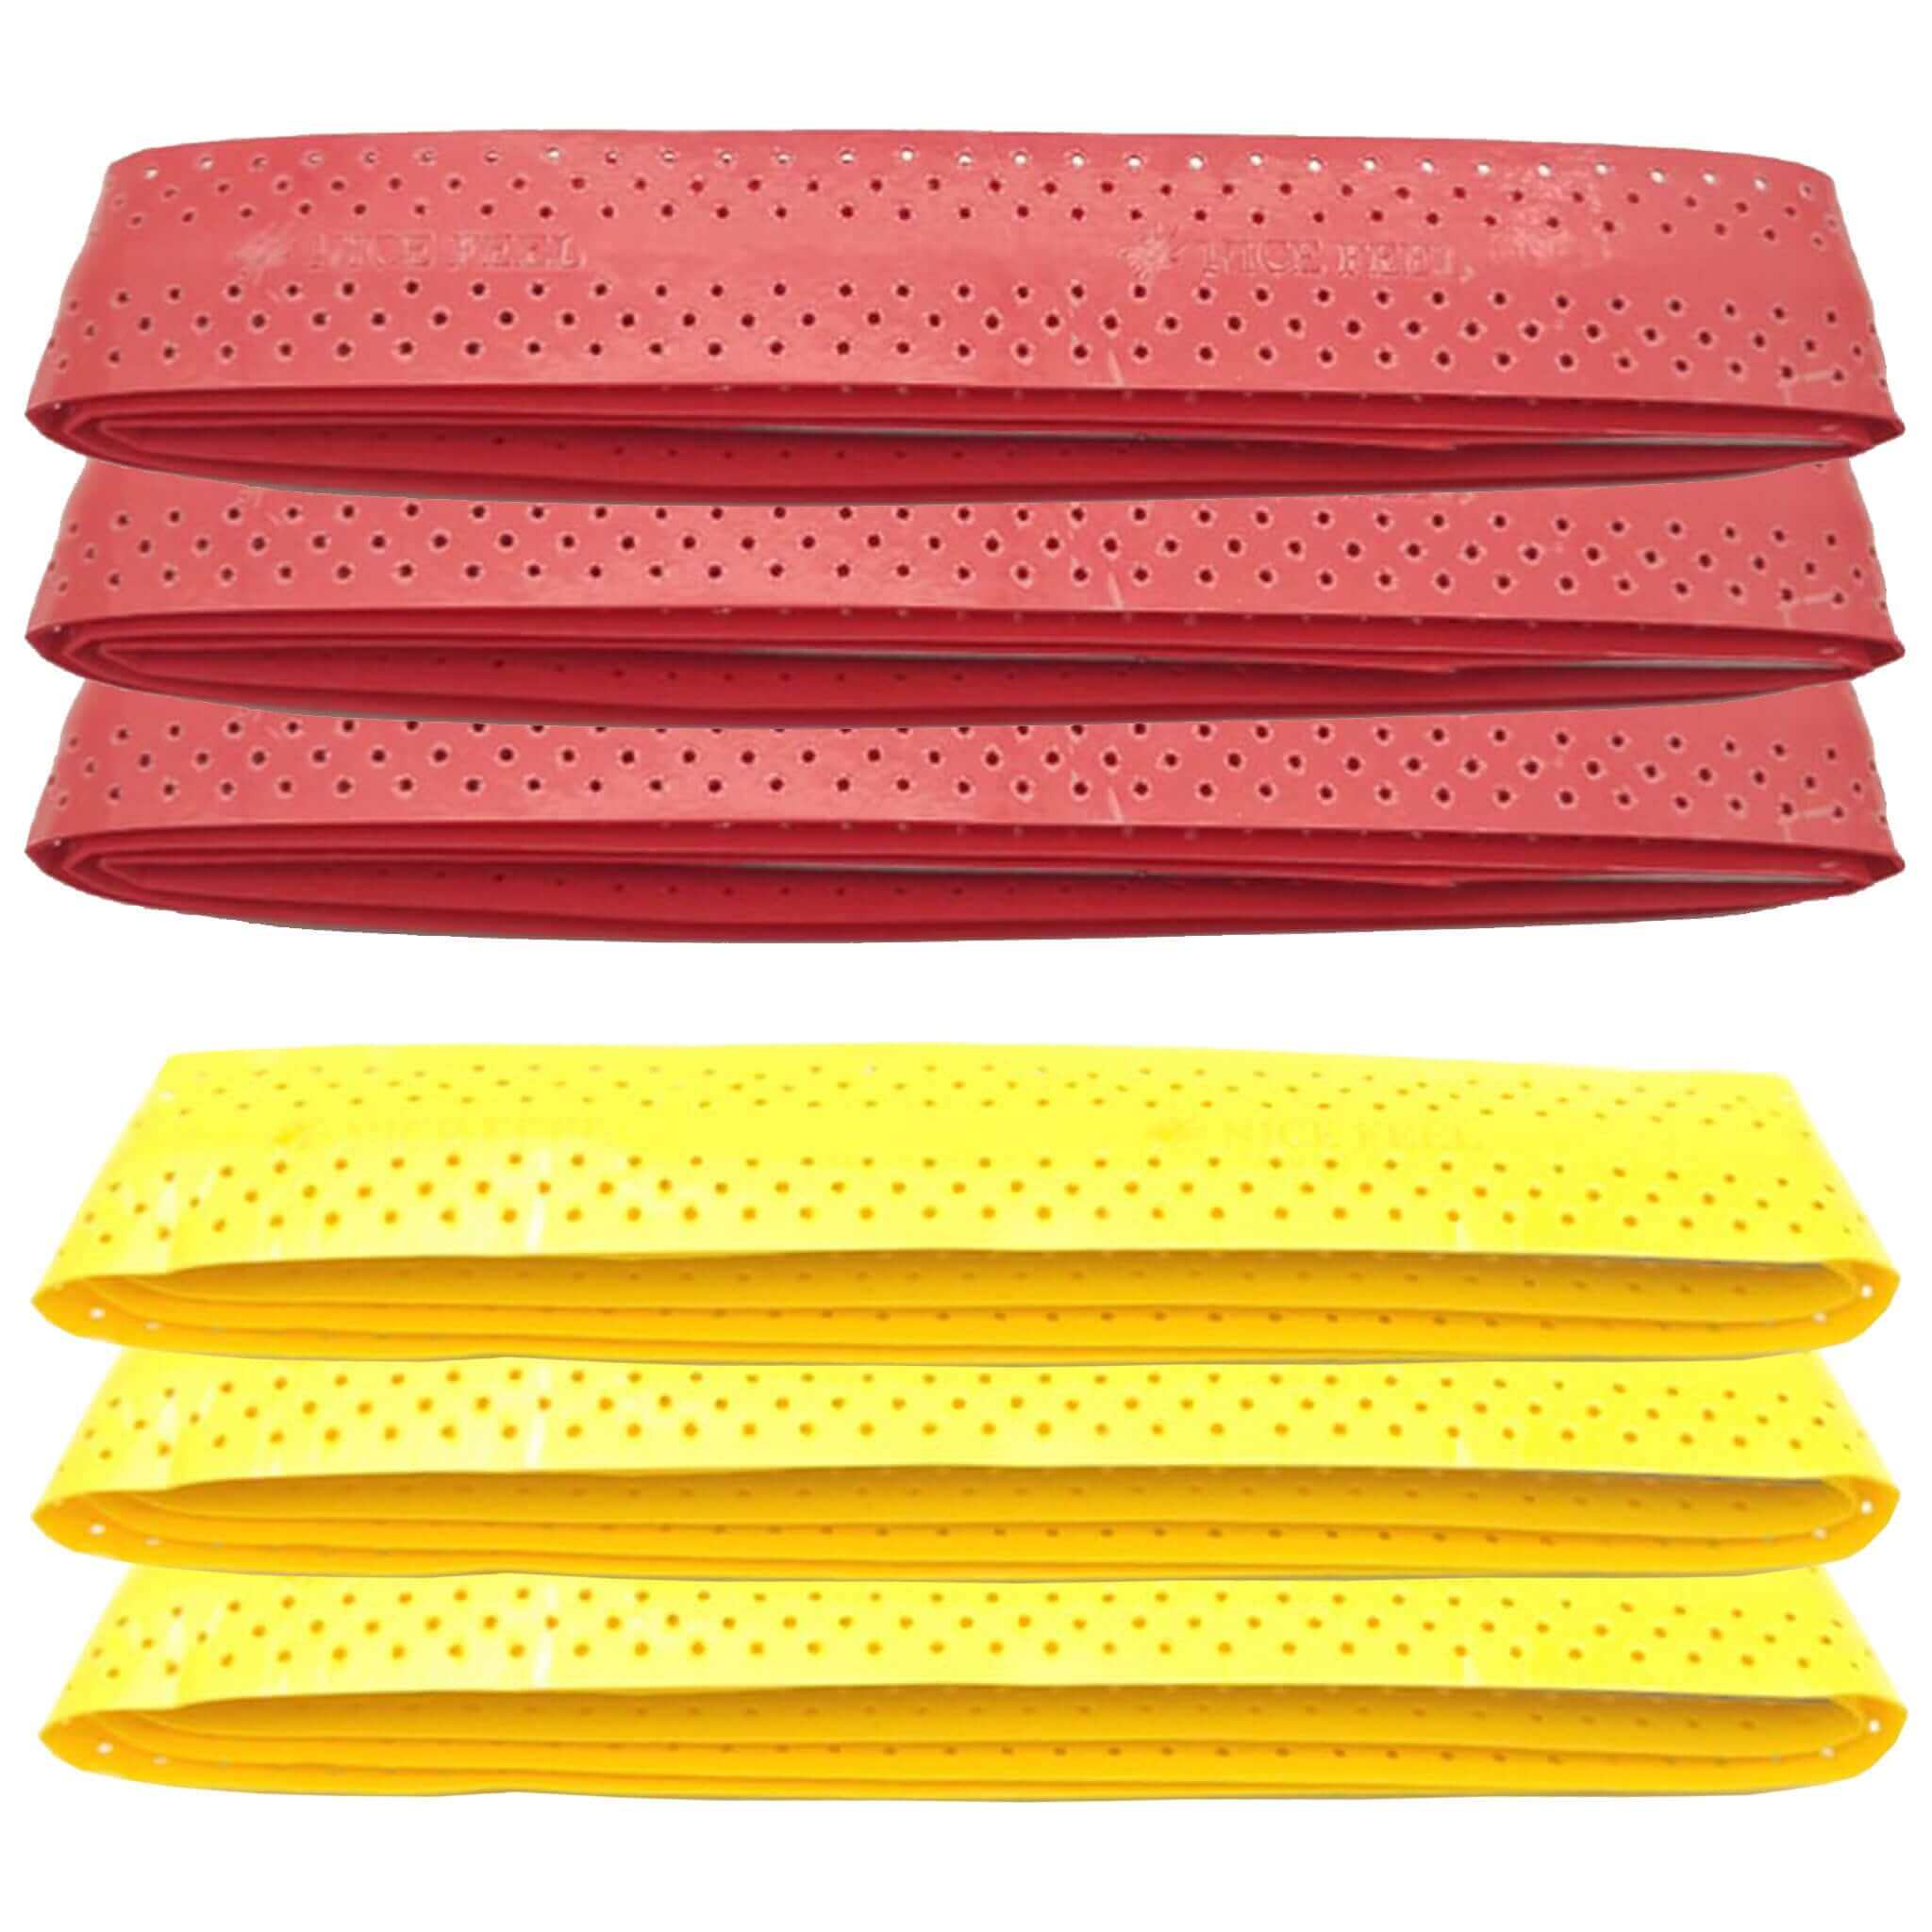 6 Pack Badminton 805 Overgrips | INSOURCE